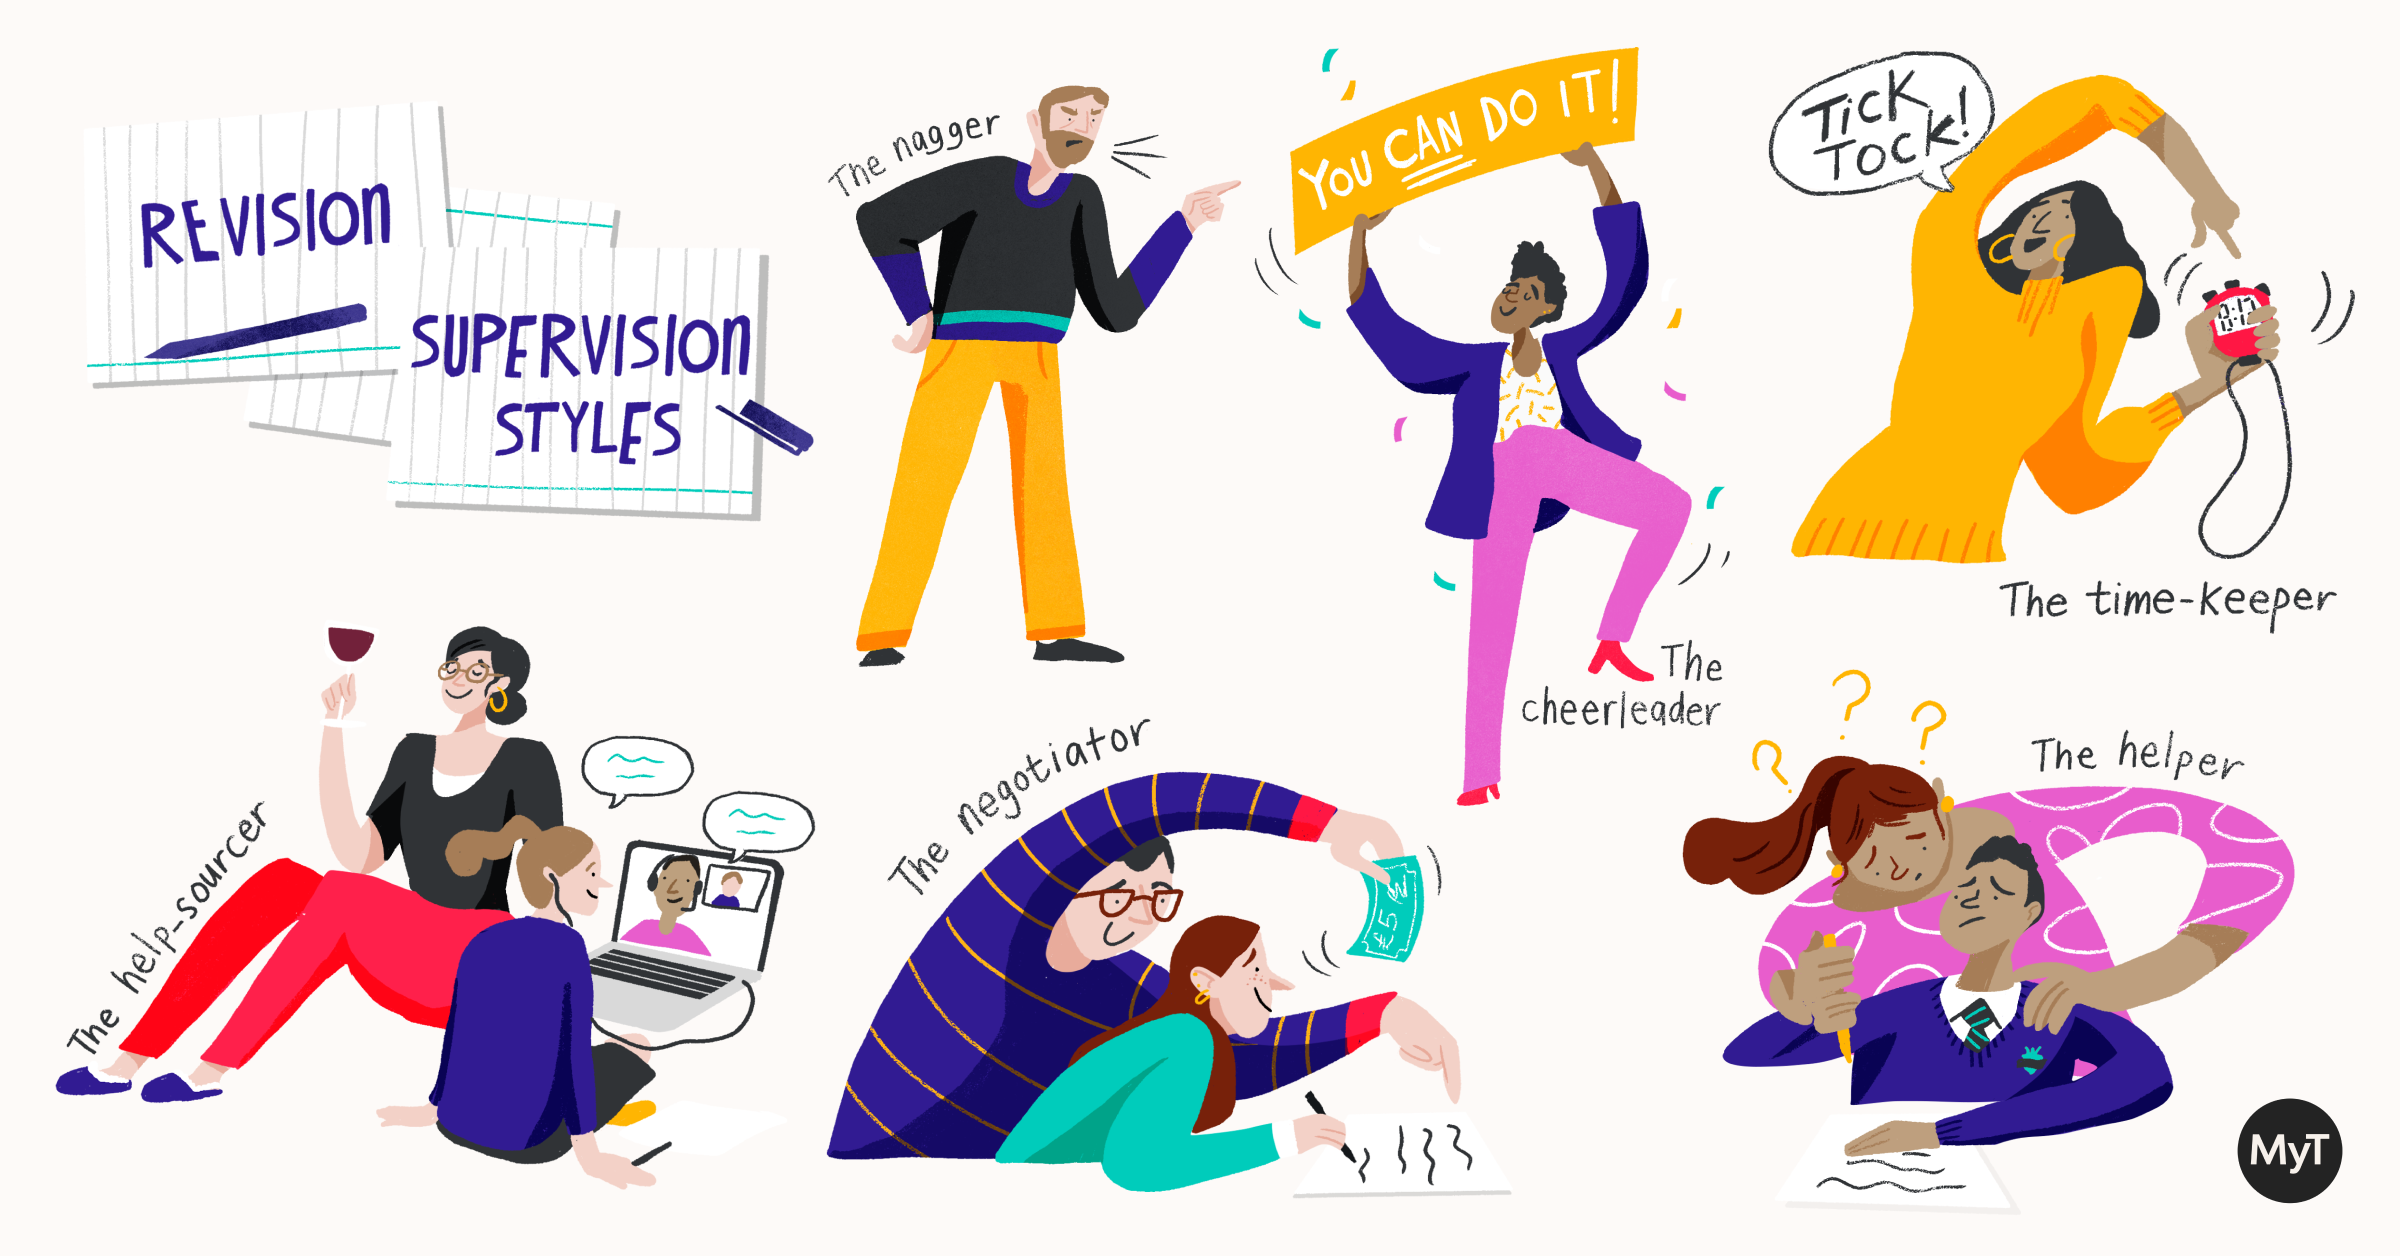 Which revision supervision style are you?